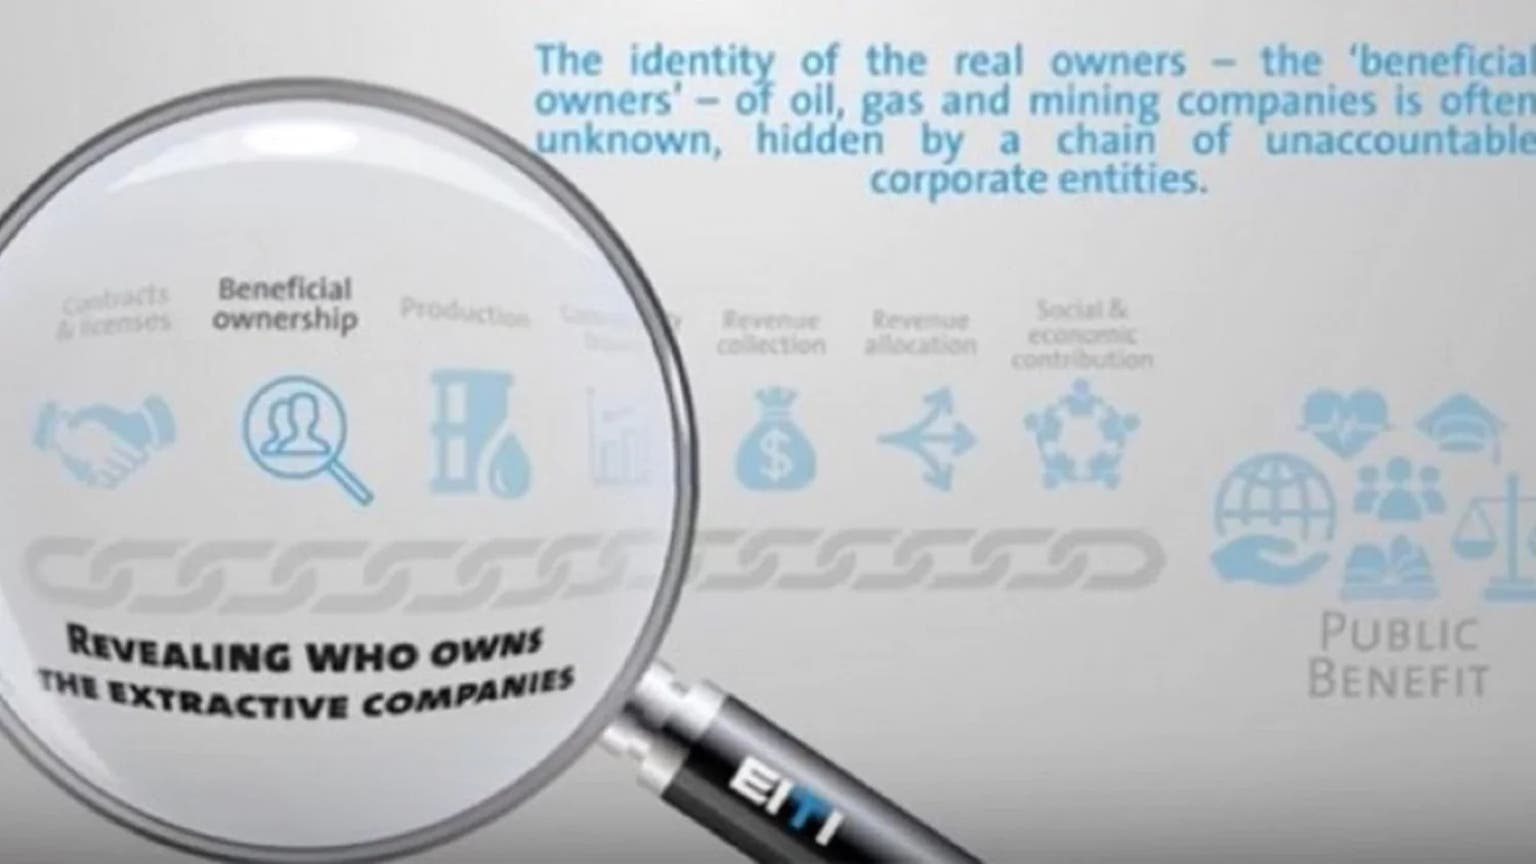 Beneficial ownership